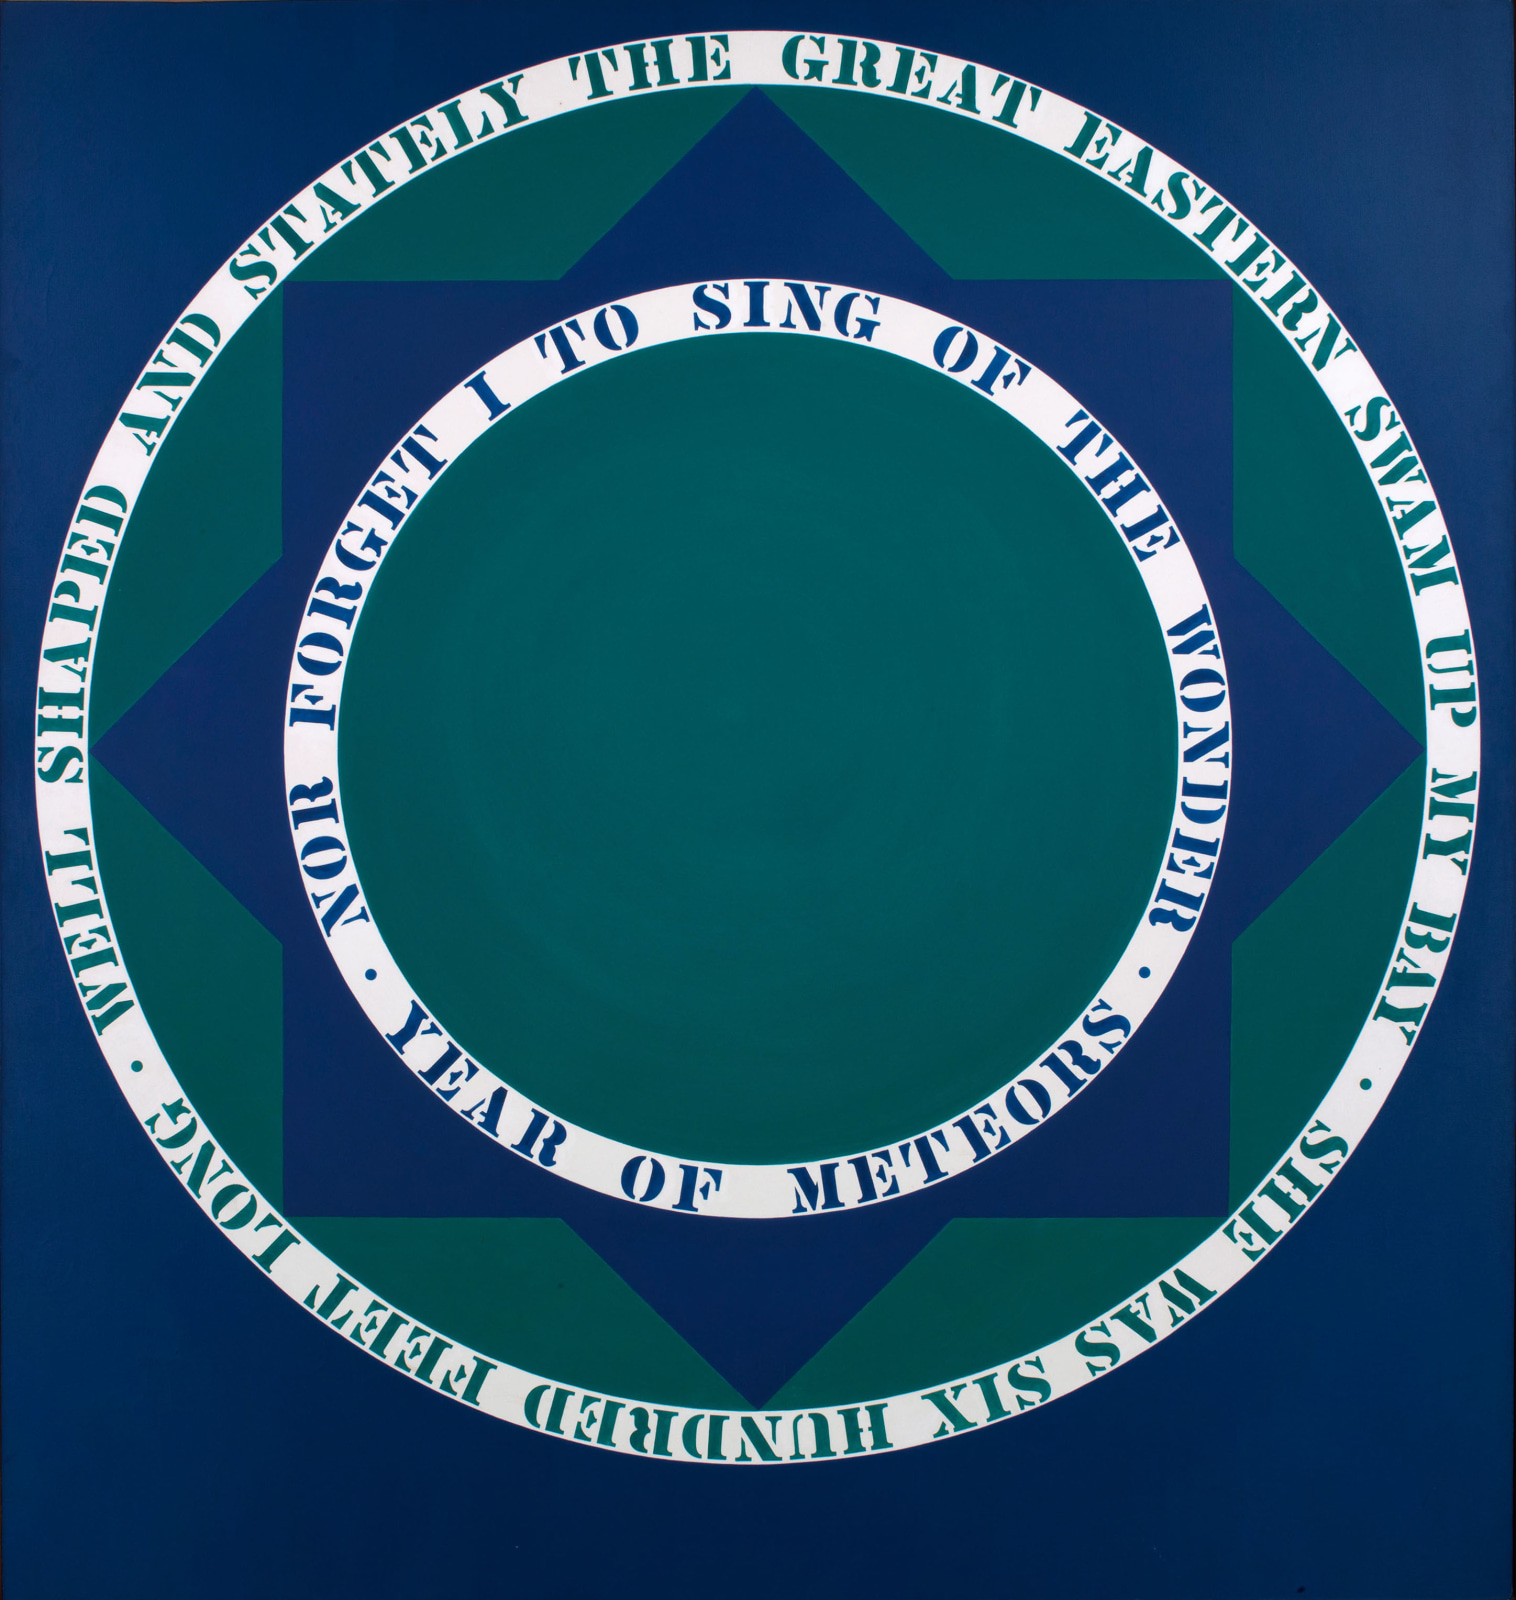 Painting and Sculpture of a Decade, 54–64 - Tate Gallery - Exhibitions - Robert Indiana